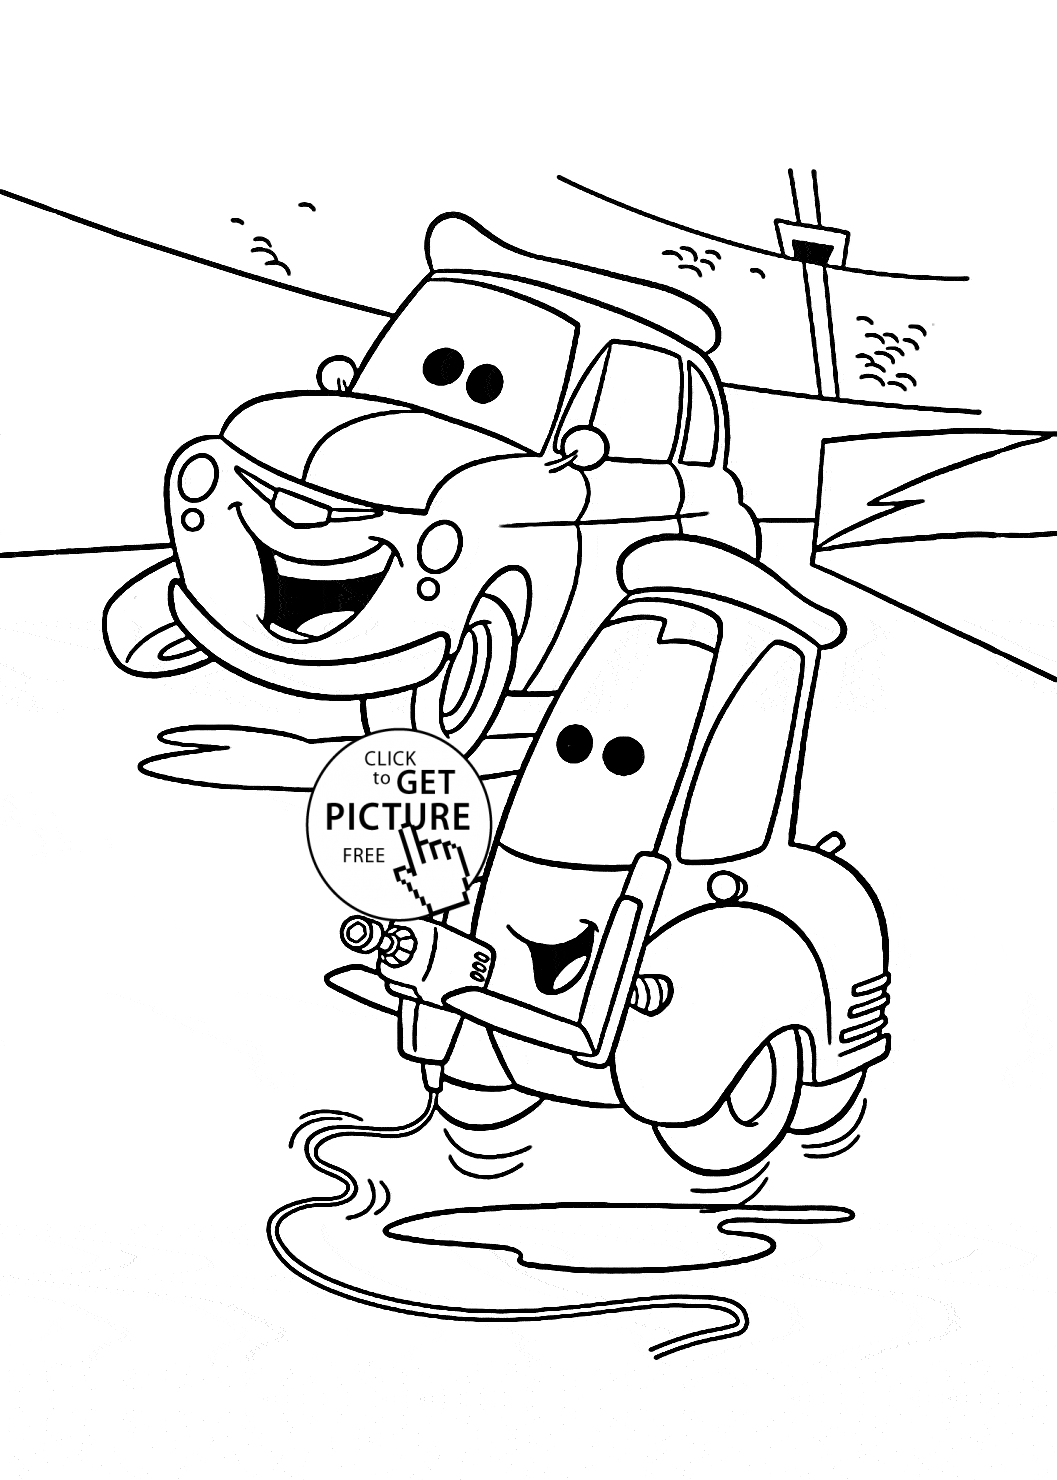 Download Disney Cars - Free Colouring Pages